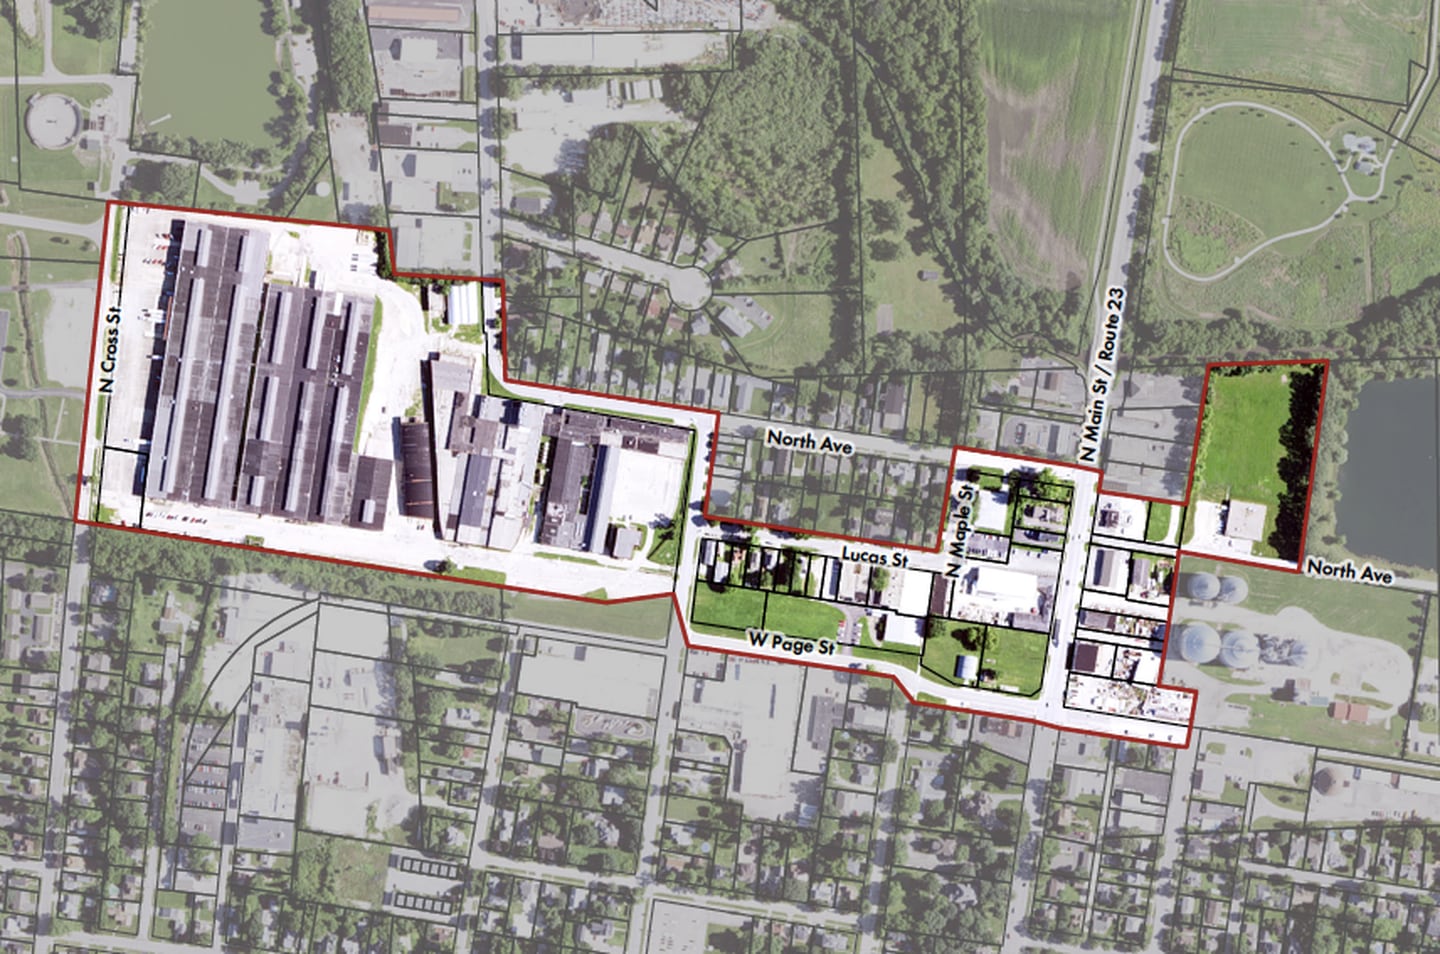 An illustration of Sycamore's newly approved tax increment financing district, designated as "TIF 2".